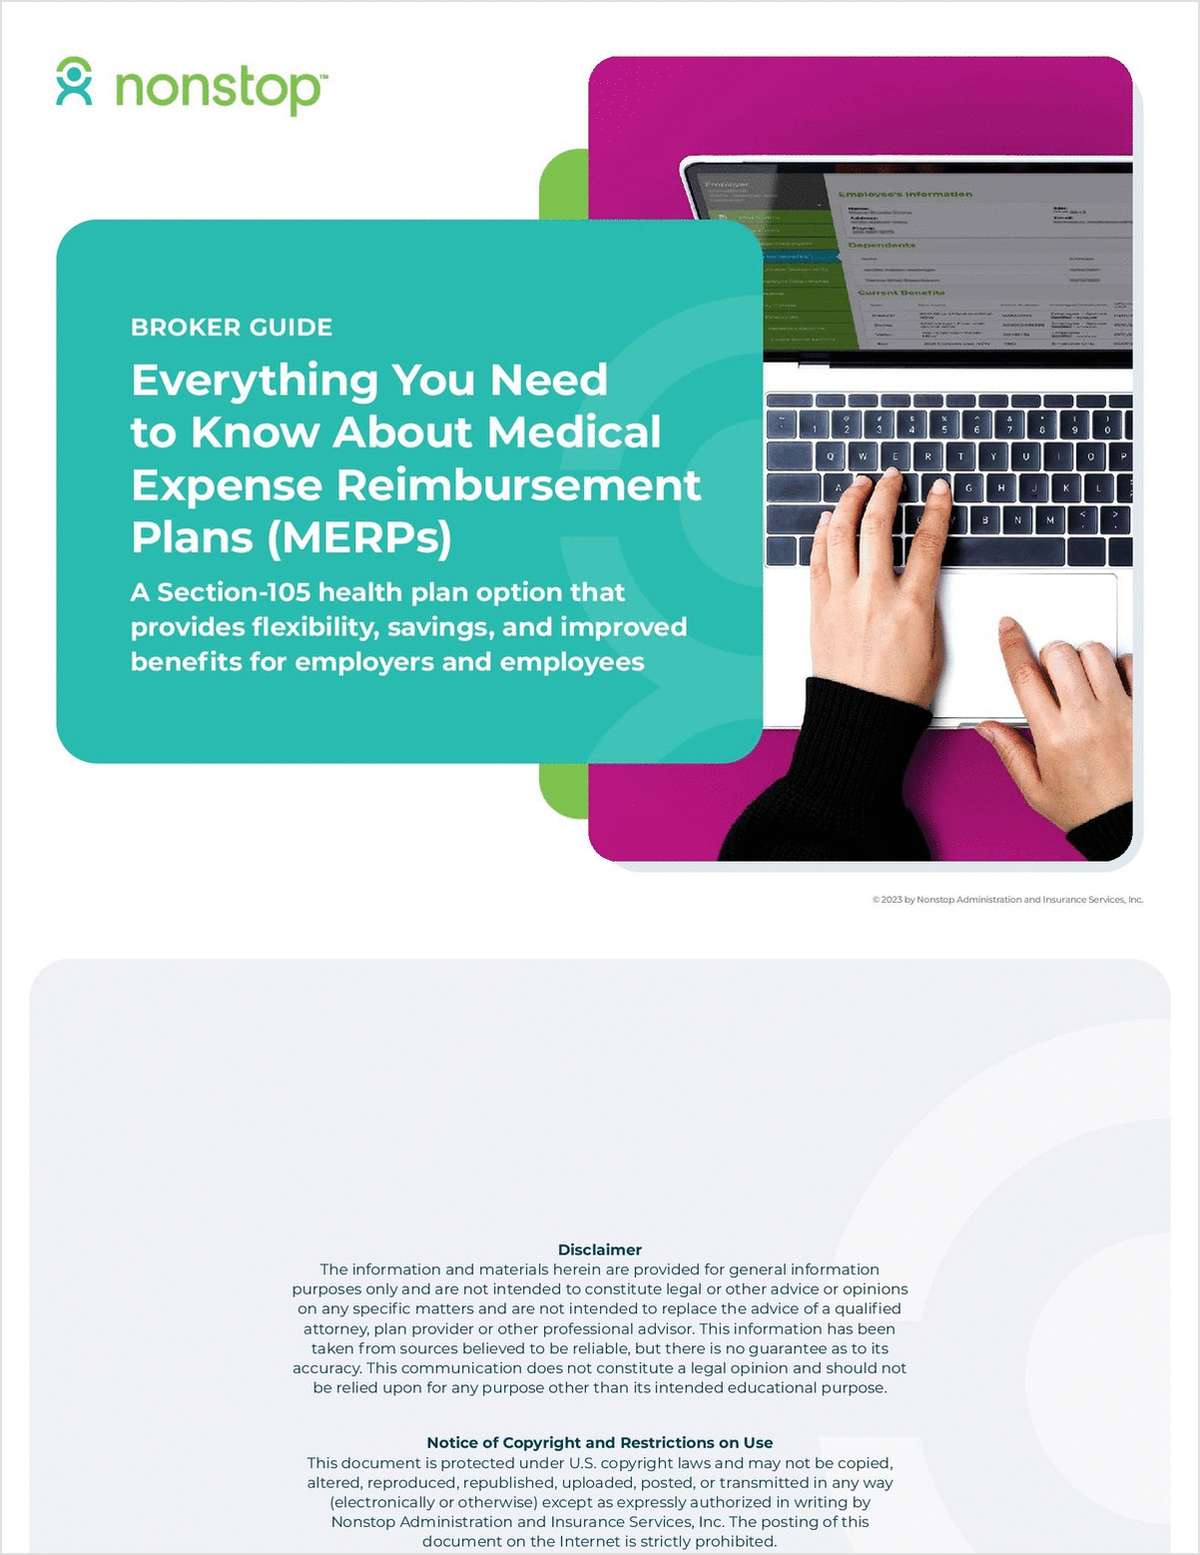 Everything You Need to Know About Medical Expense Reimbursement Plans (MERPs)